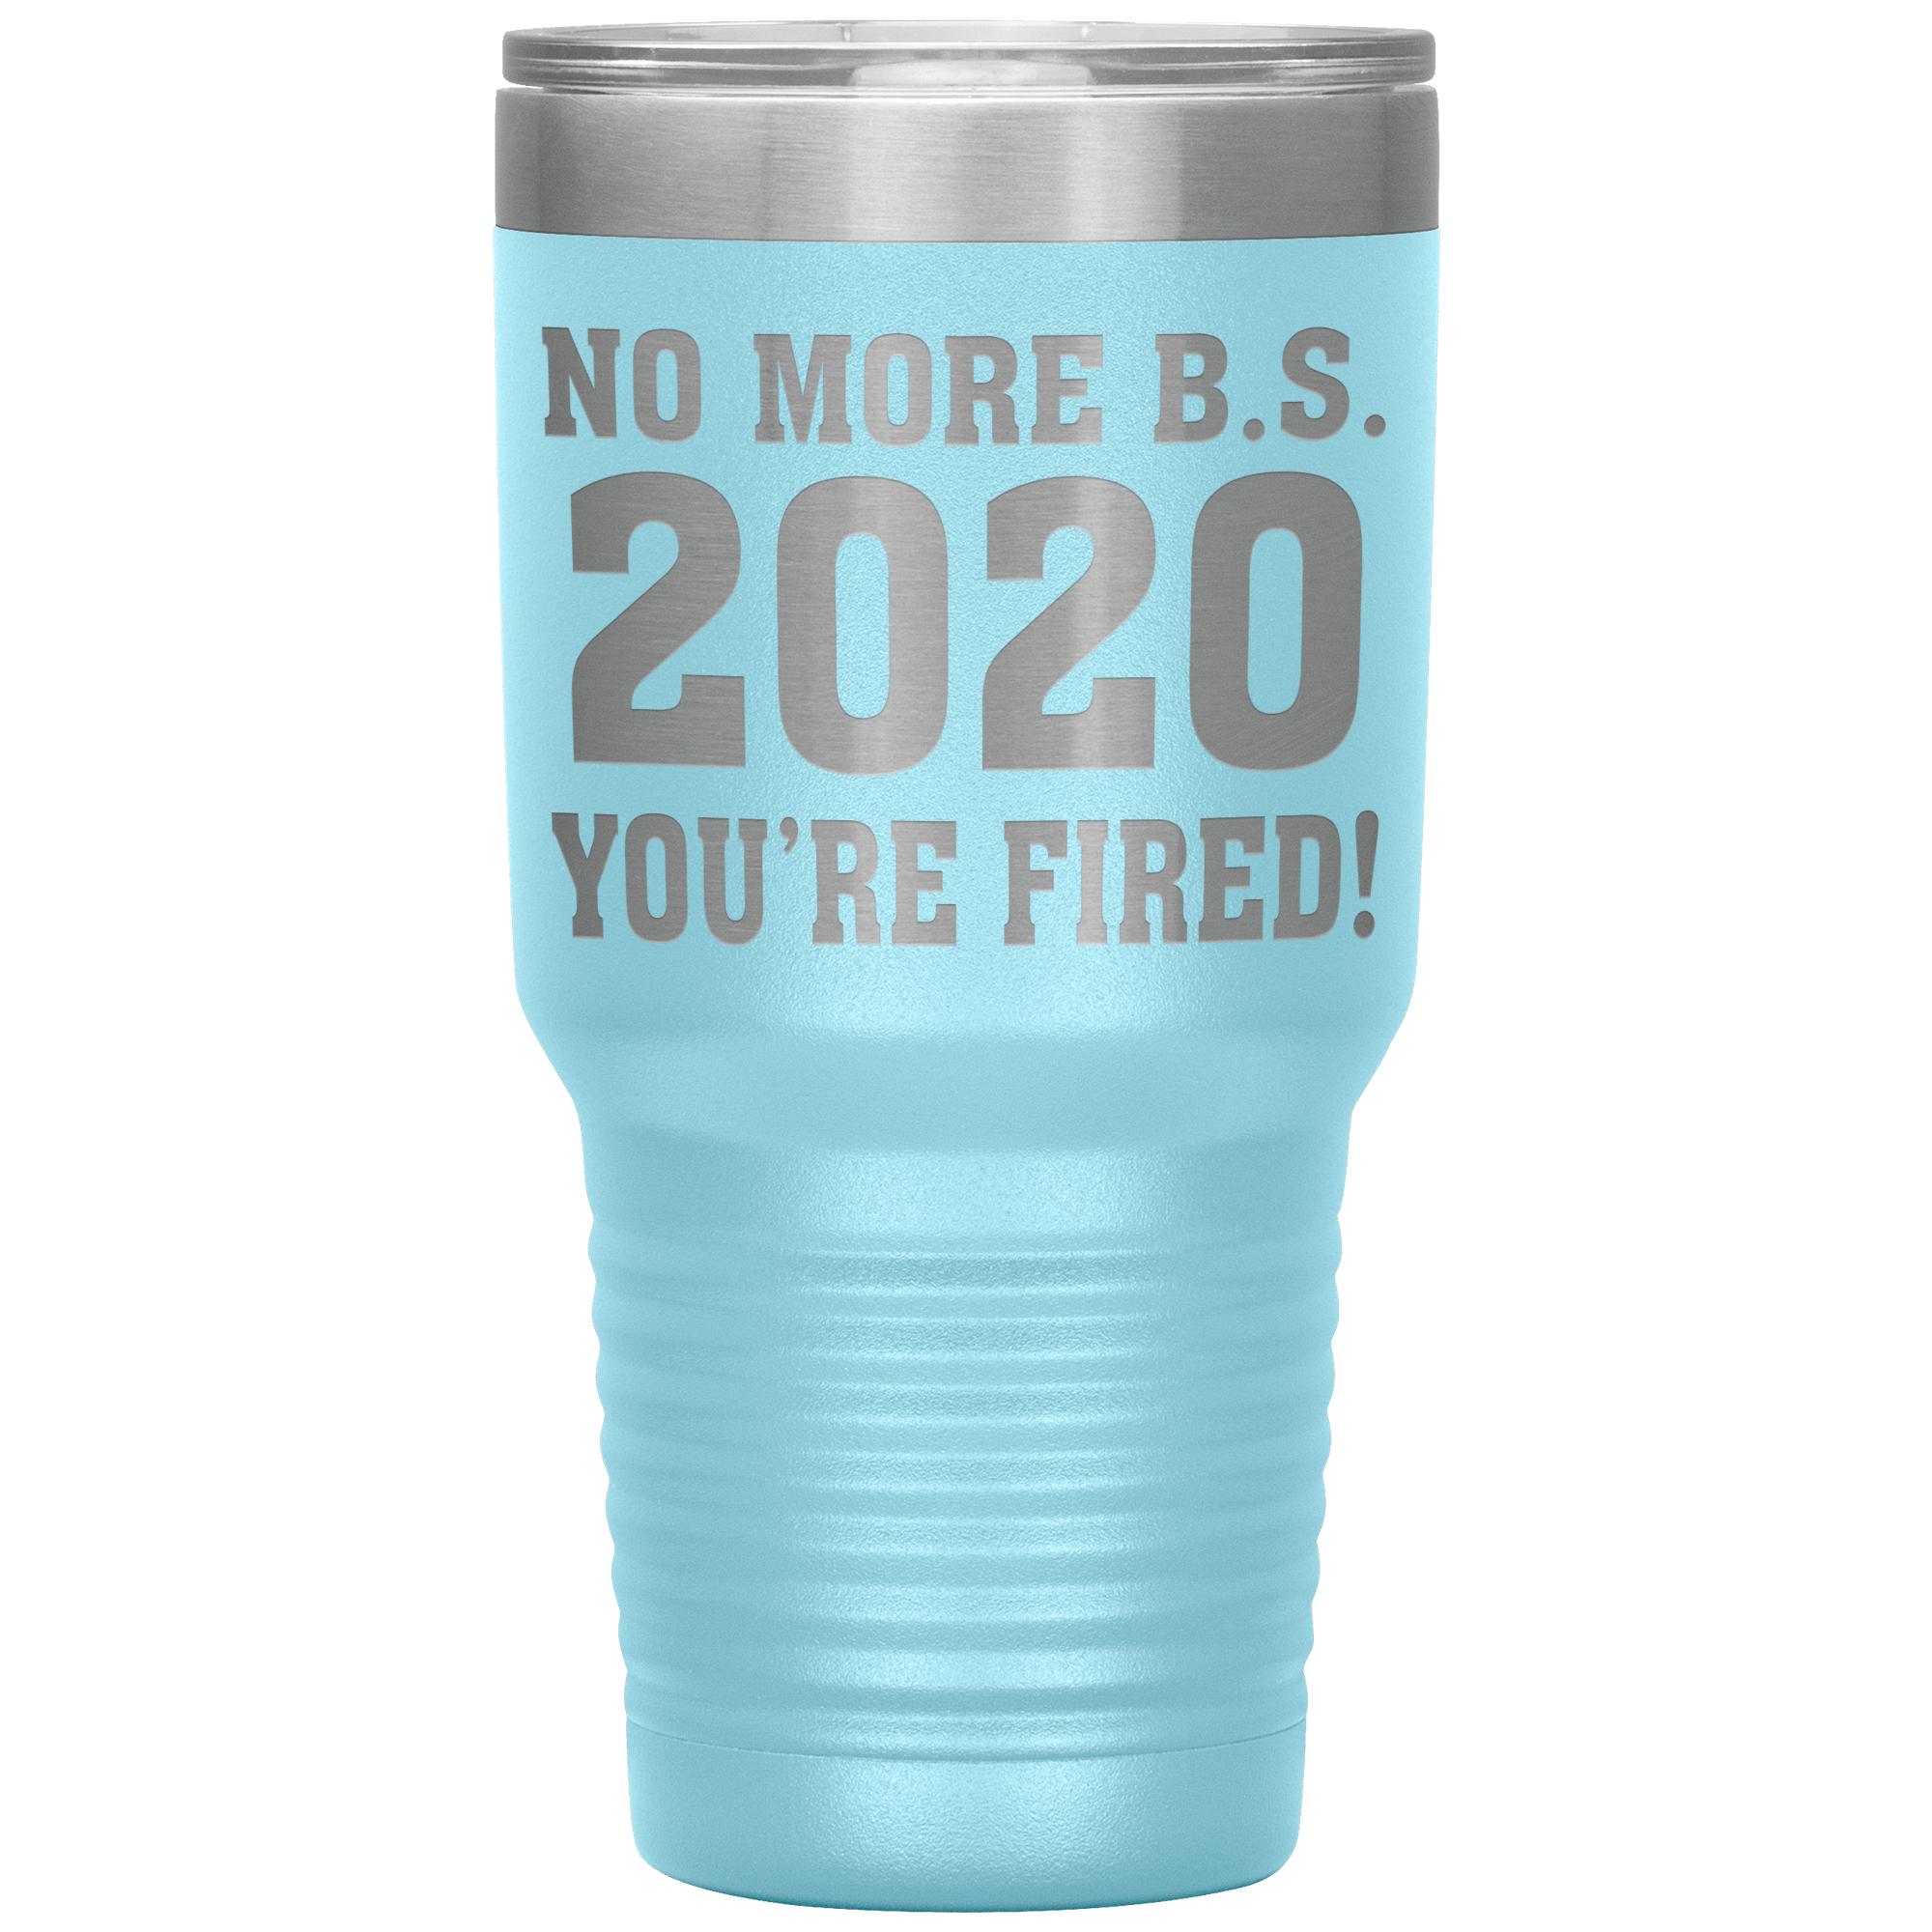 " NO MORE B. S. 2020 YOU'RE FIRED! " TUMBLER